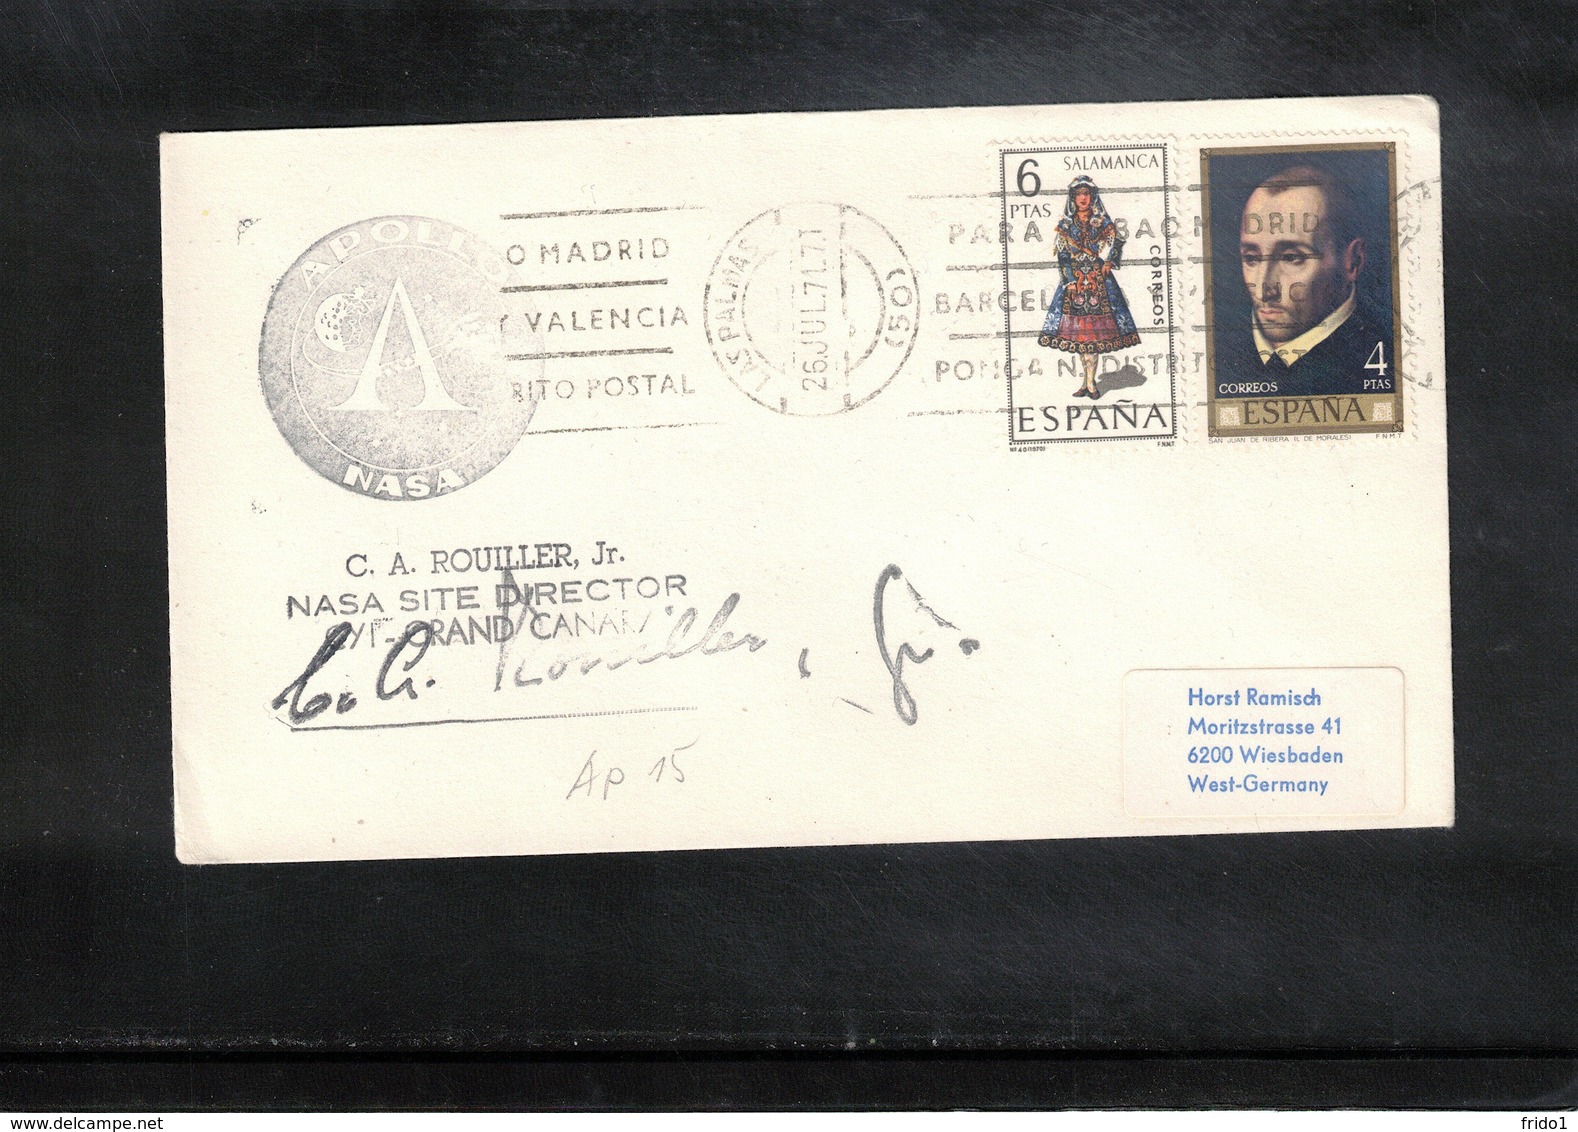 Spain 1971 Space / Raumfahrt Apollo 15 Tracking Station Canary Islands Interesting Cover - USA